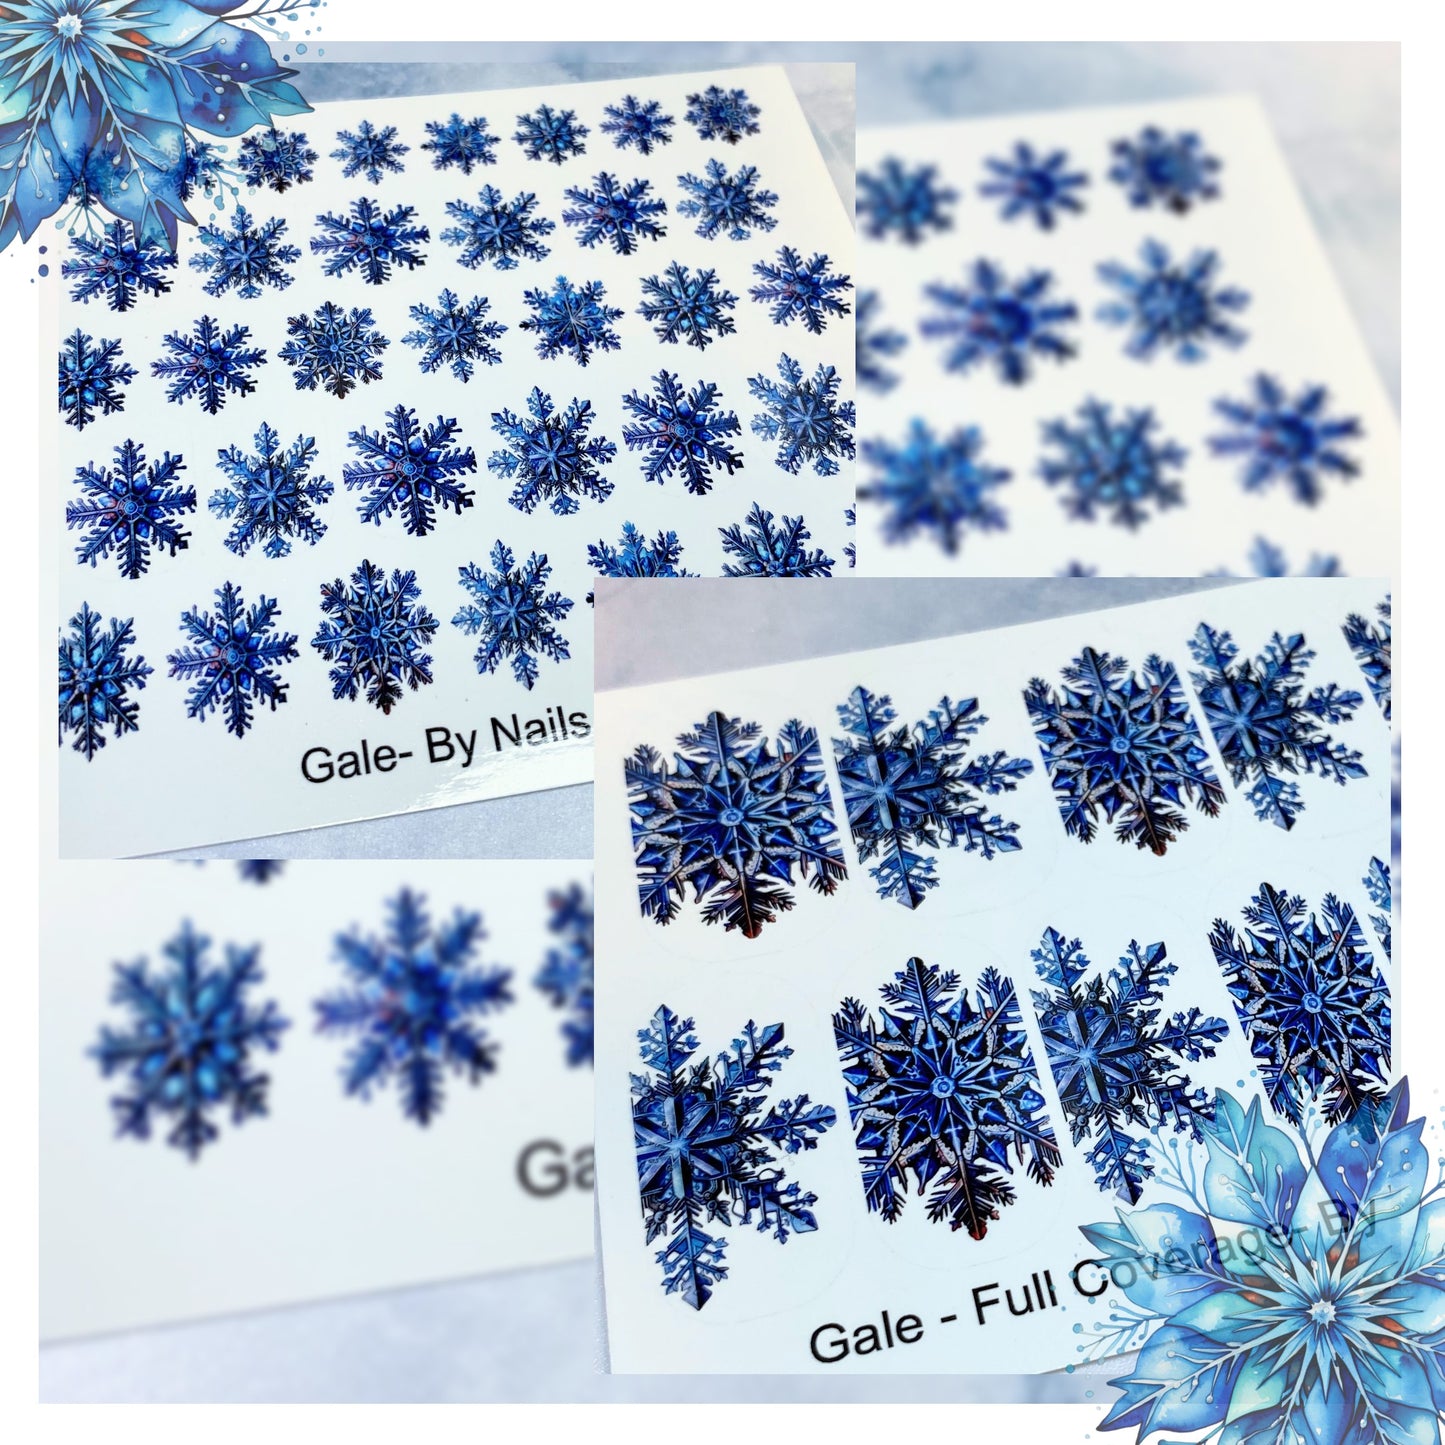 Gale- Snowflake Decals For Nails